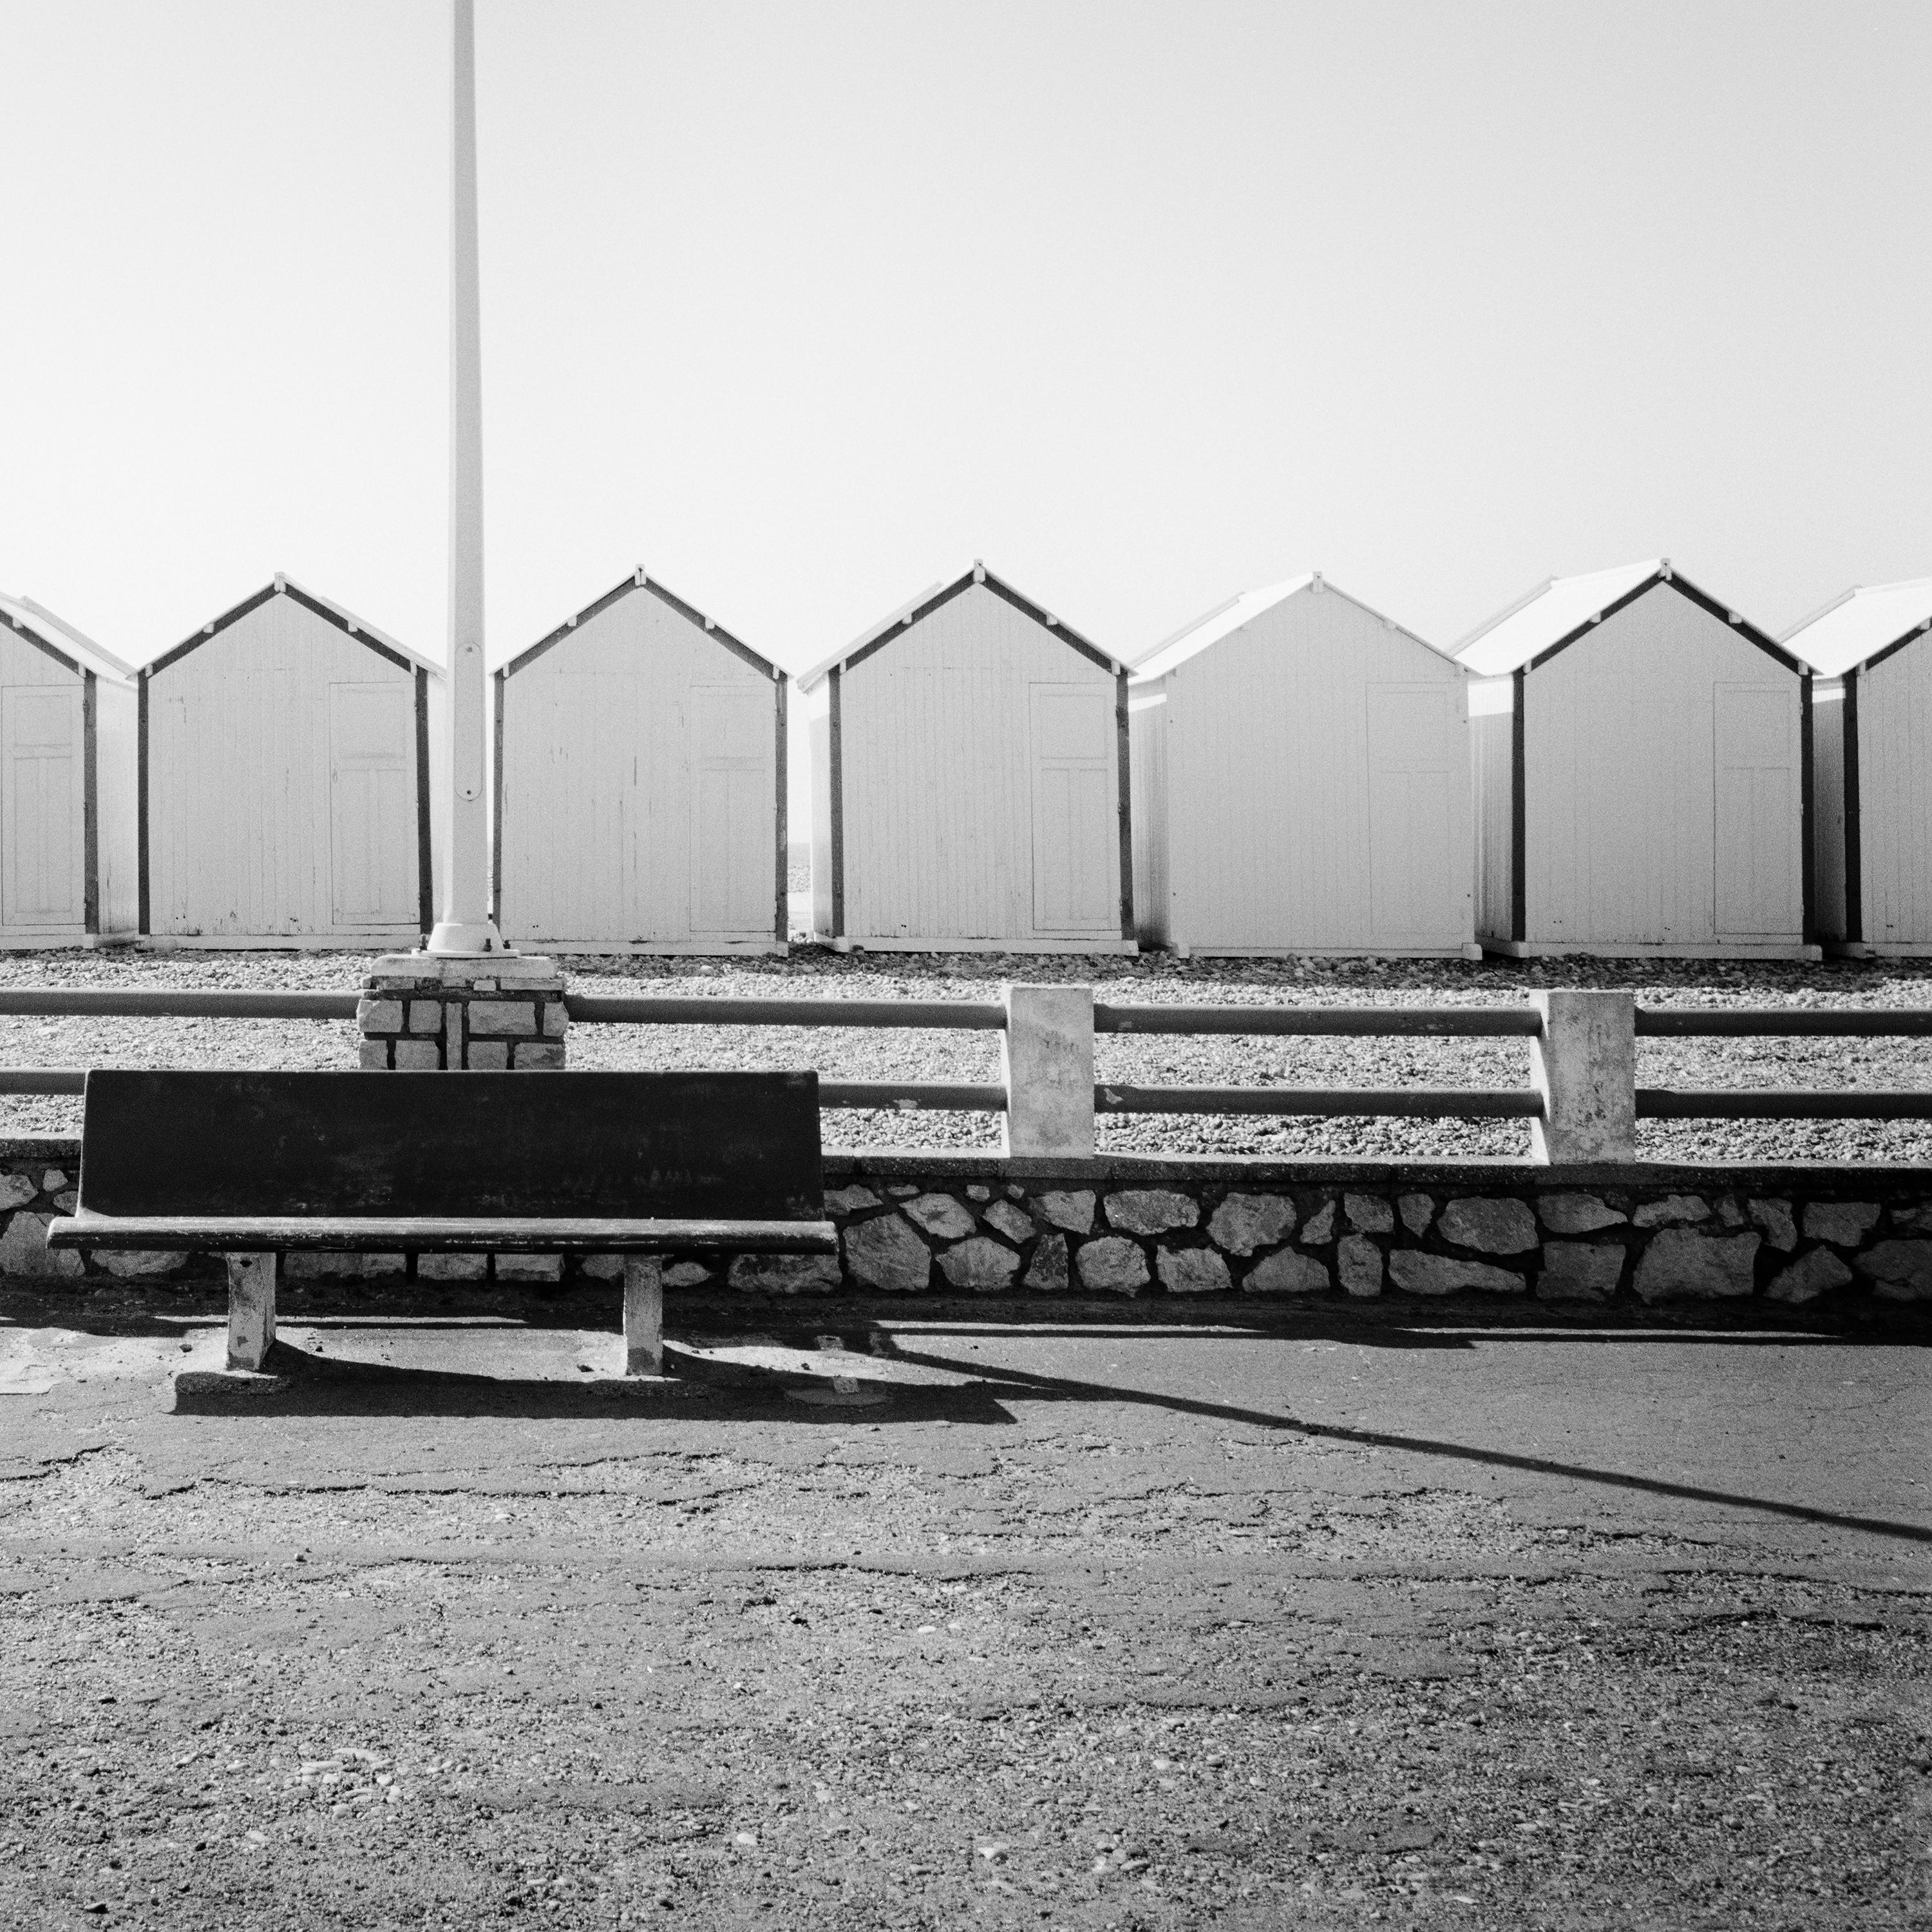 Bench on the Promenade beach huts France black white landscape art photography For Sale 4